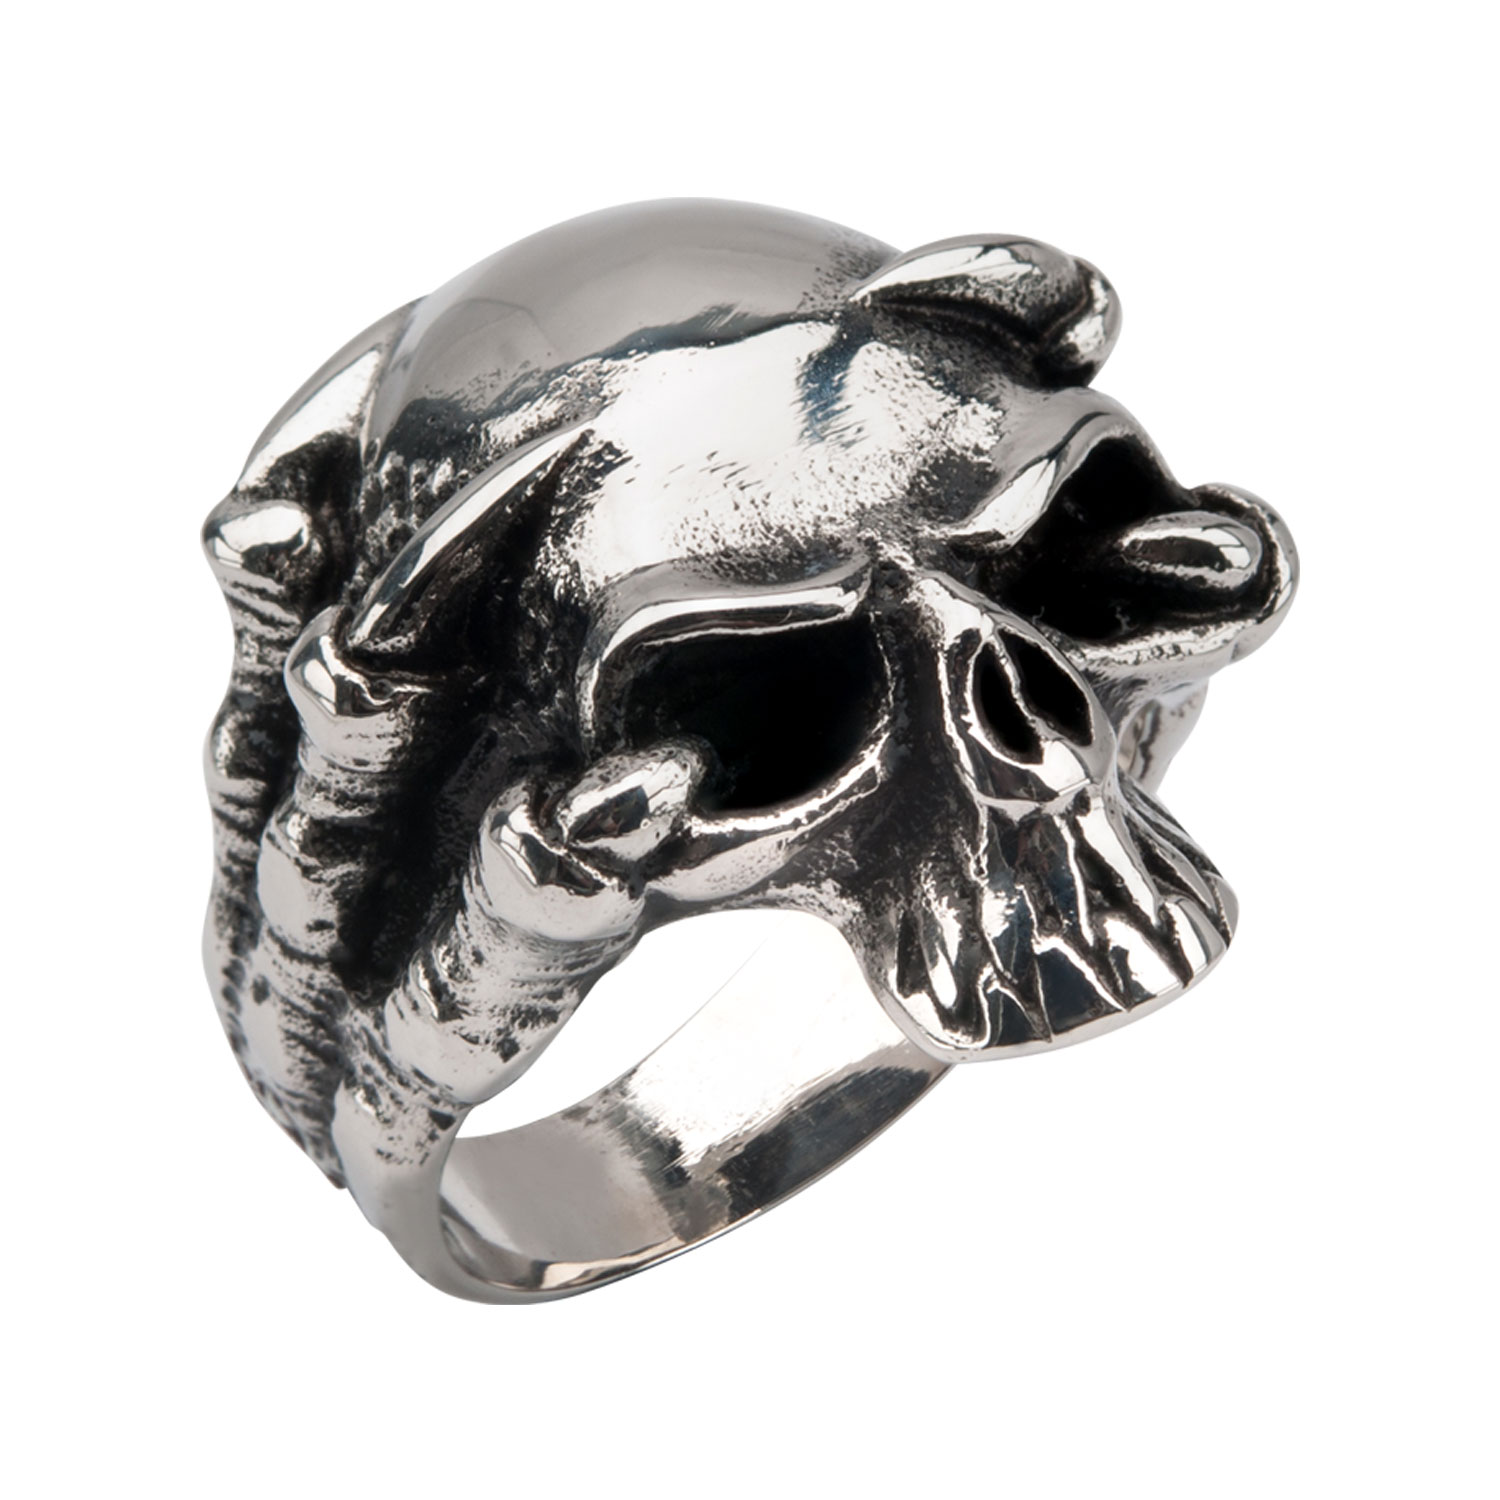 Black Oxidized Skull Ring with Claws Jayson Jewelers Cape Girardeau, MO